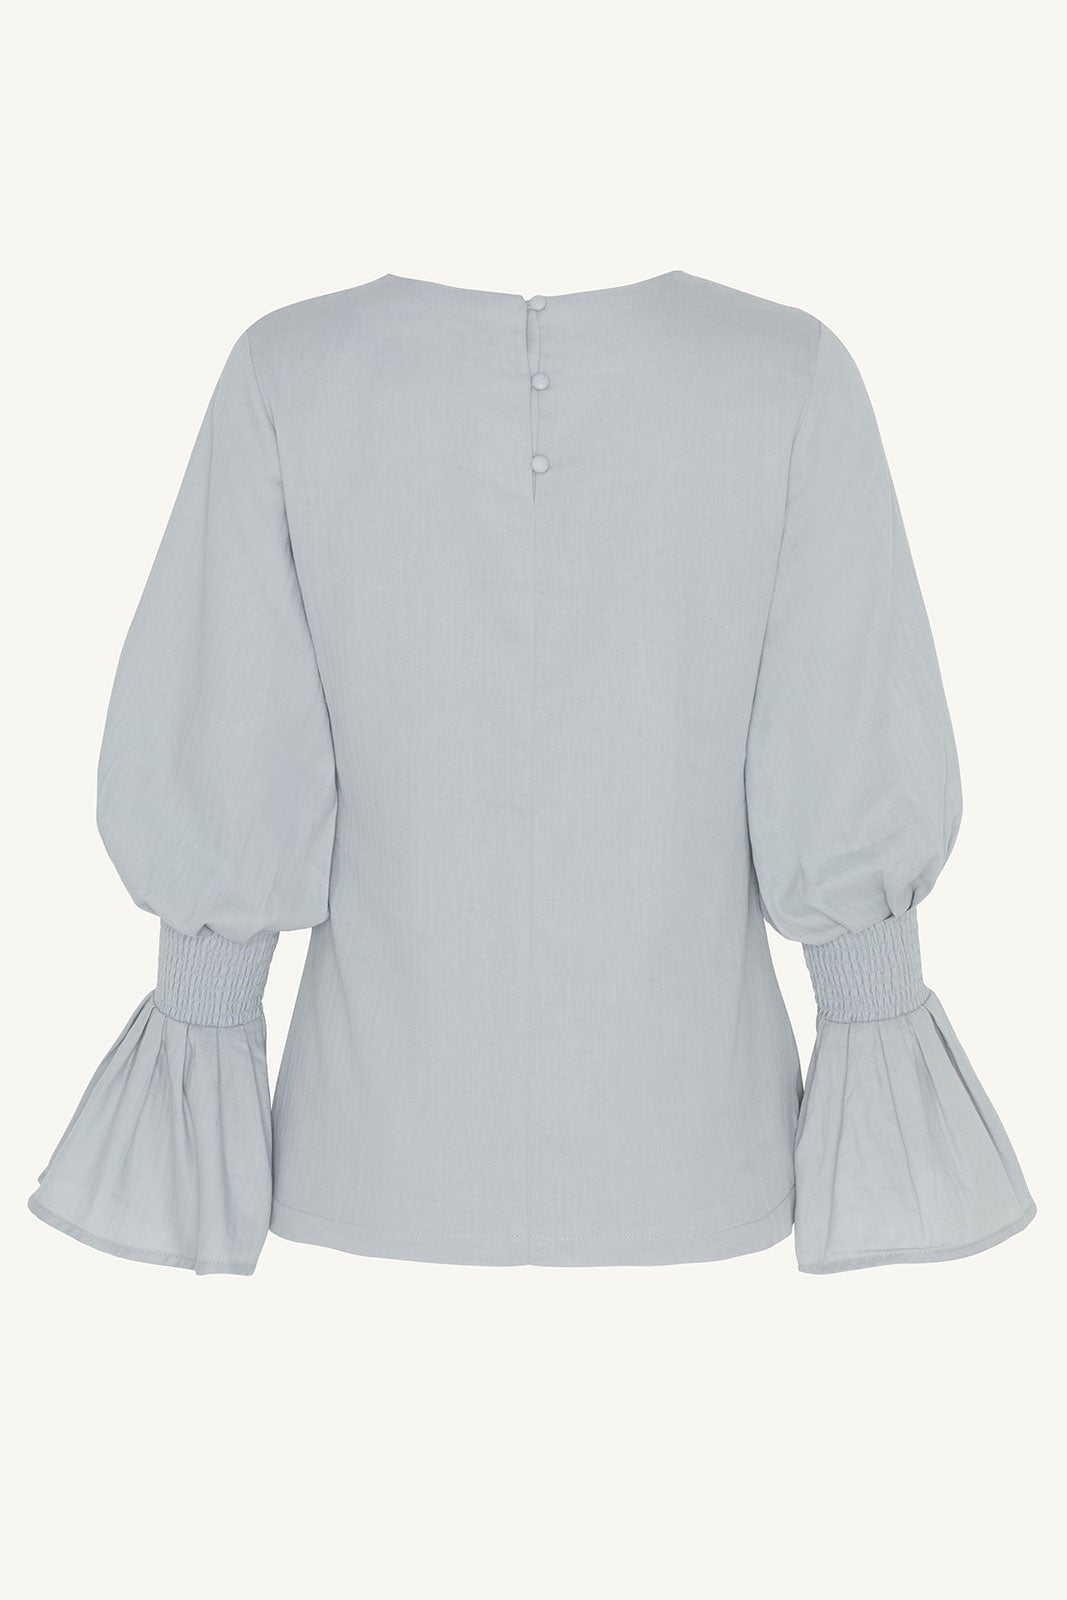 Bea Bell Sleeve Top - Powder Blue Clothing Veiled Collection 